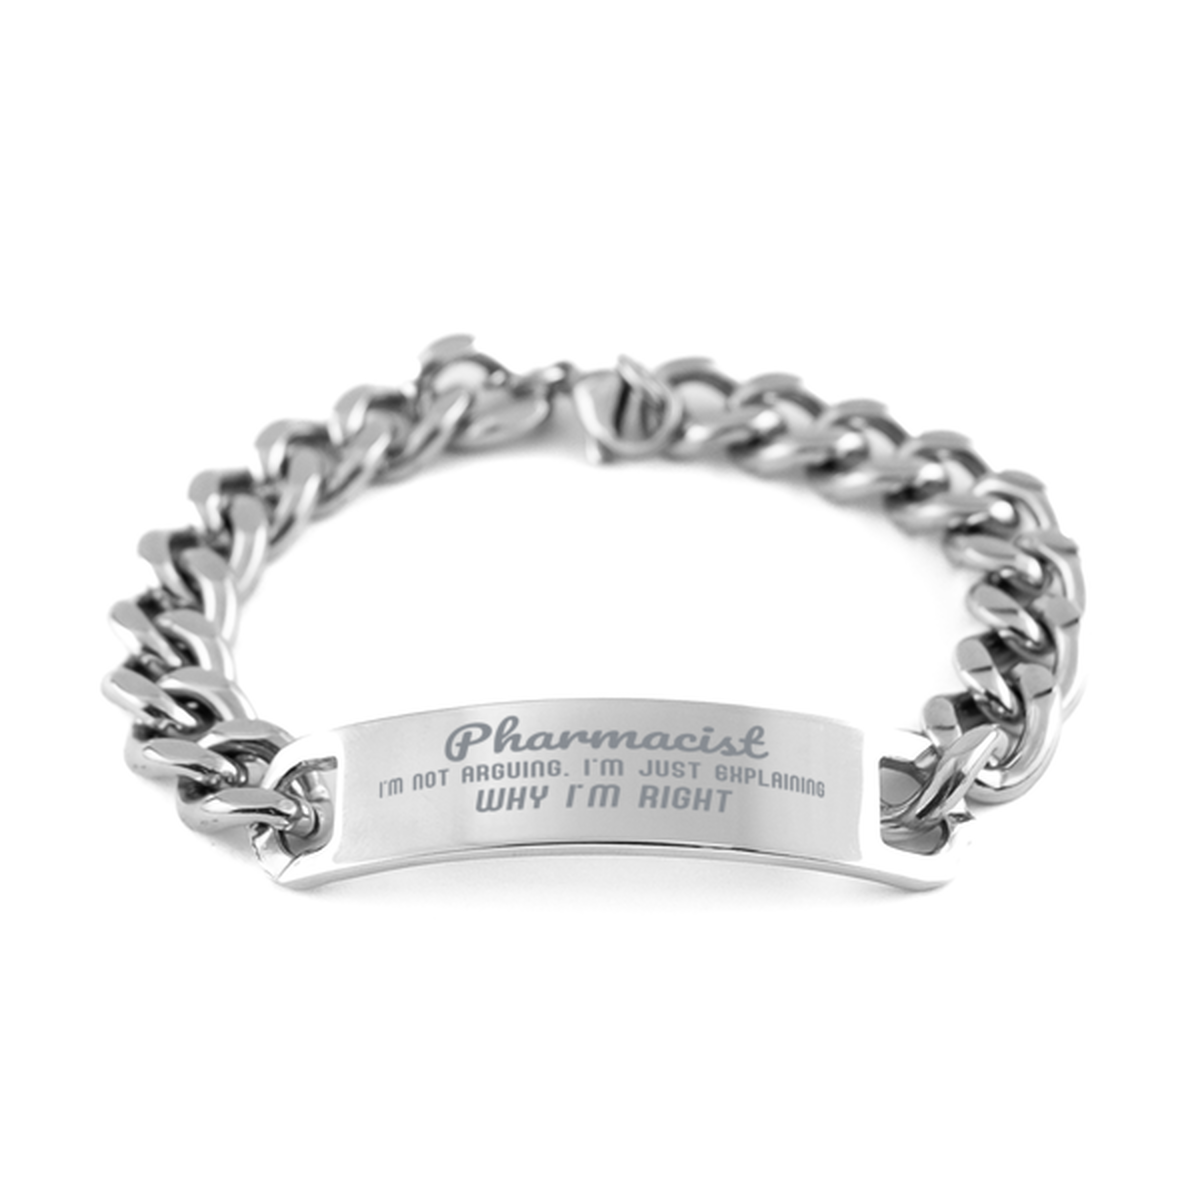 Pharmacist I'm not Arguing. I'm Just Explaining Why I'm RIGHT Cuban Chain Stainless Steel Bracelet, Graduation Birthday Christmas Pharmacist Gifts For Pharmacist Funny Saying Quote Present for Men Women Coworker